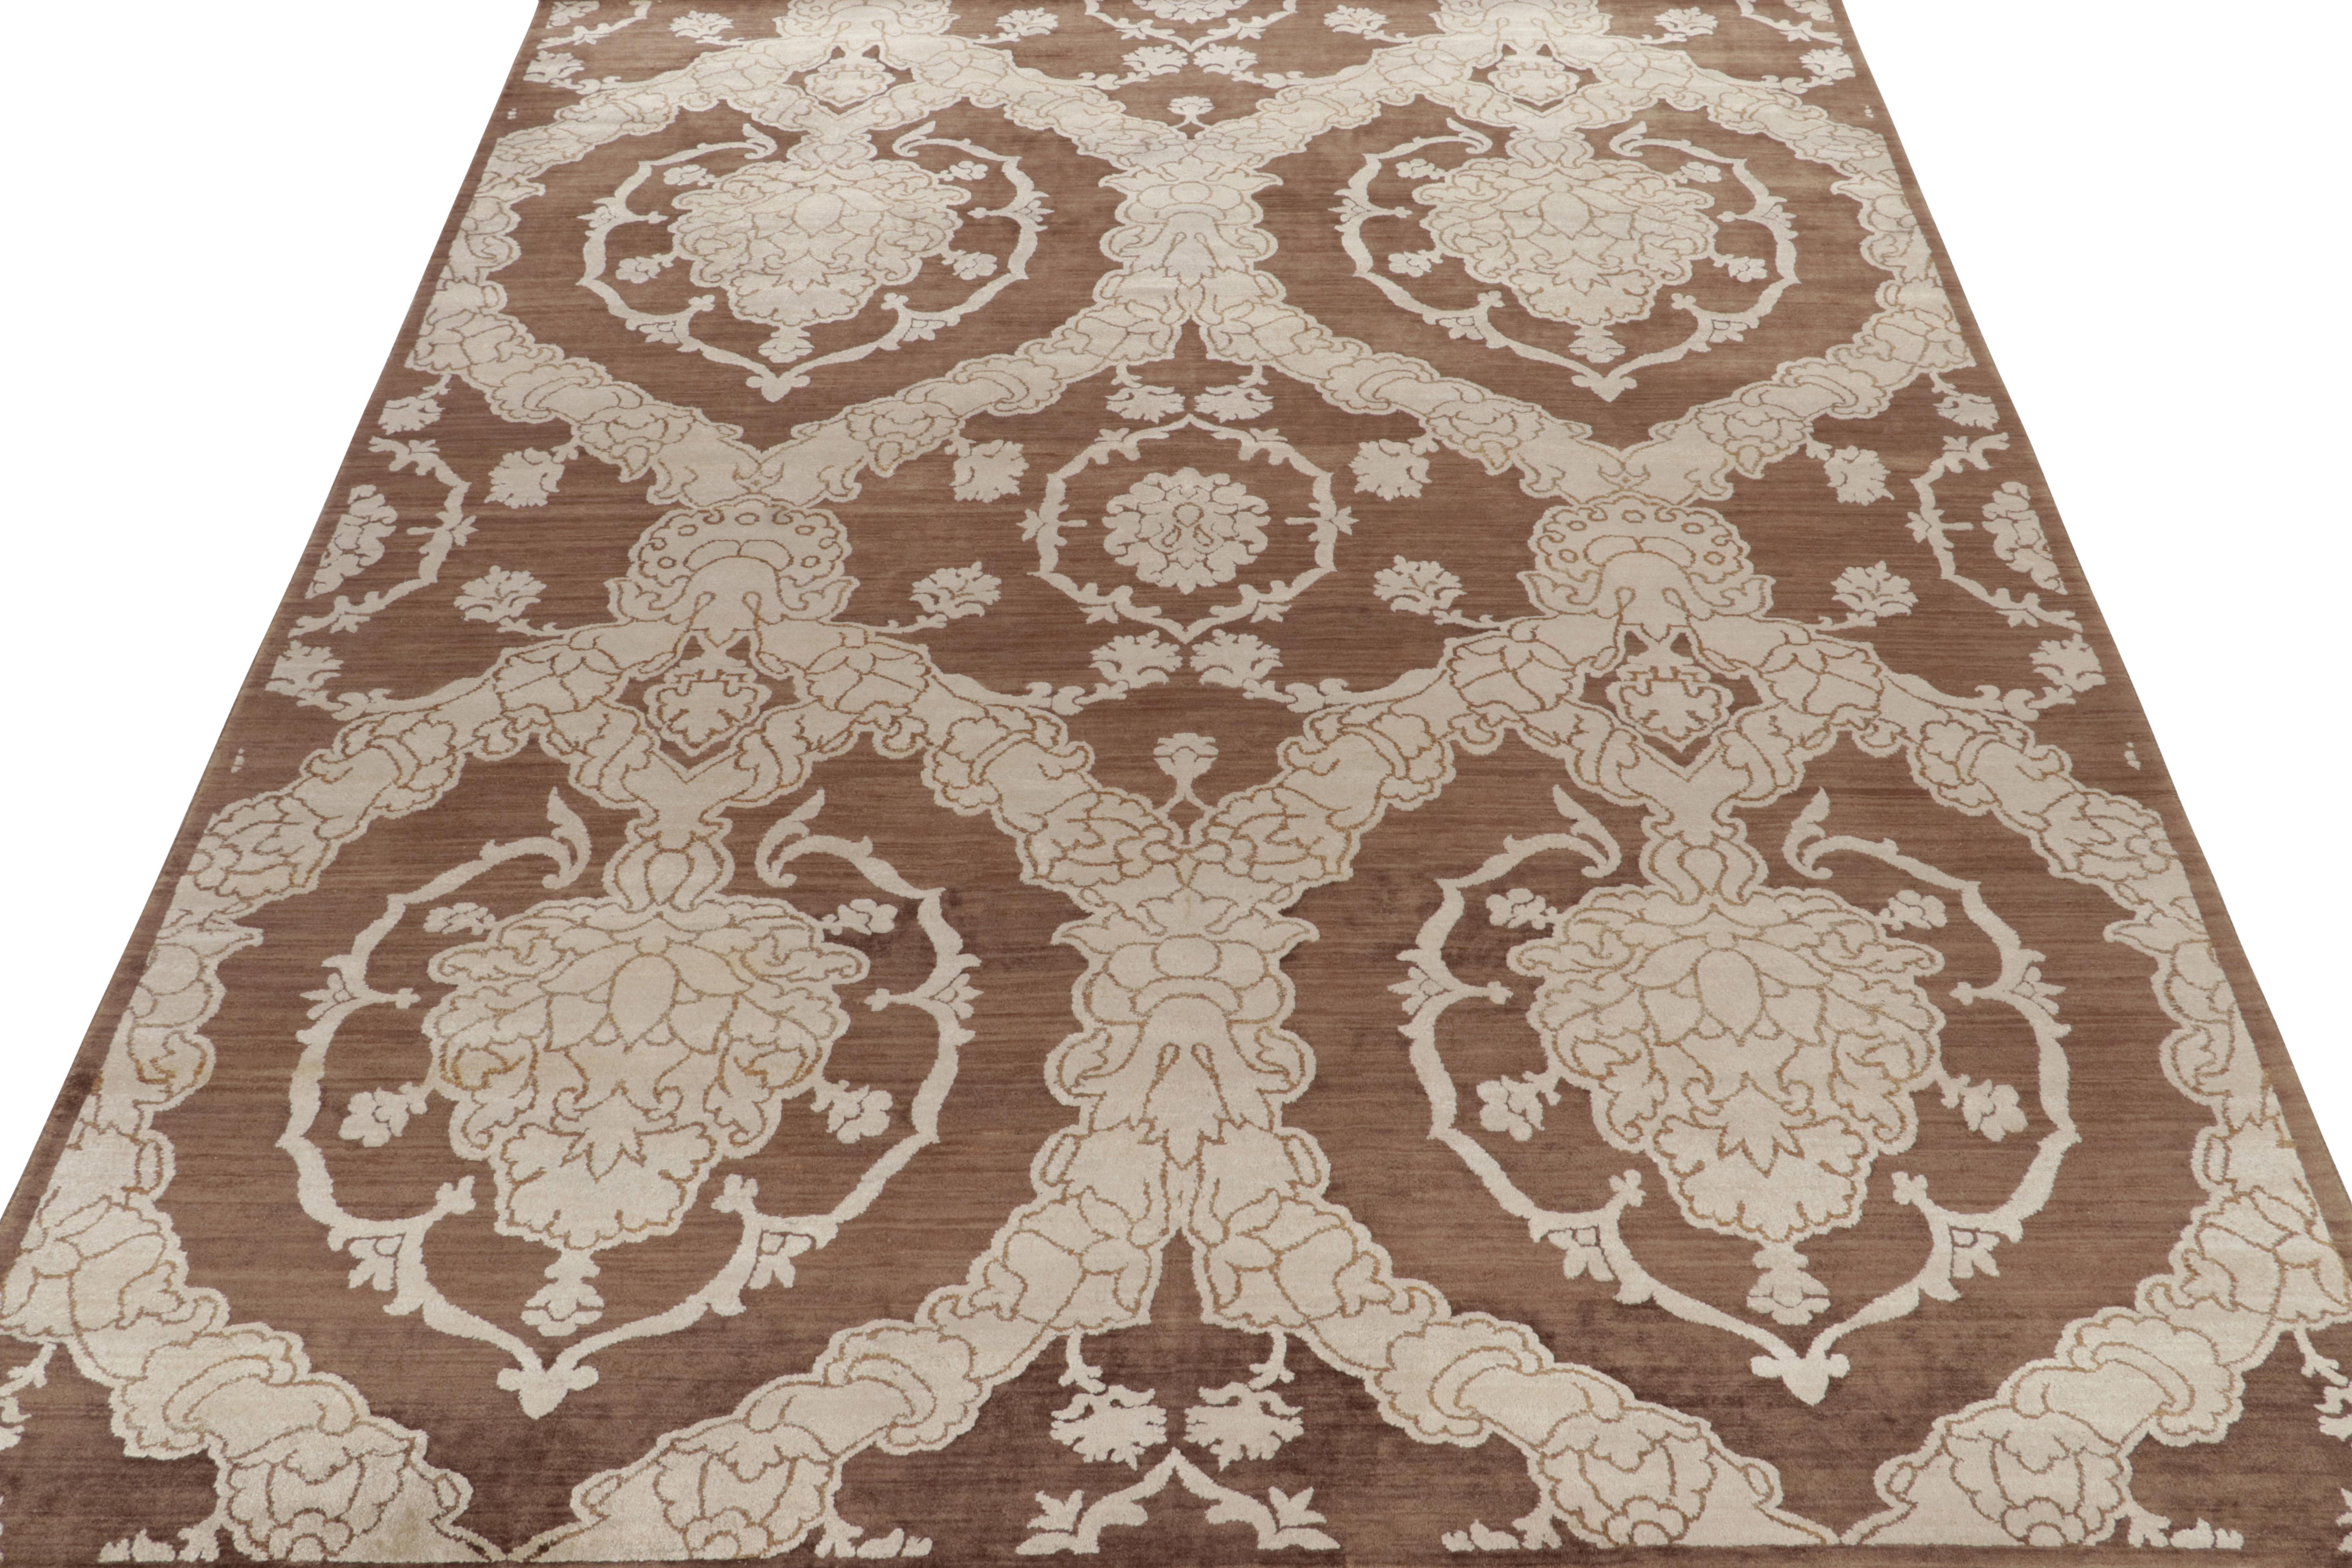 Indian Rug & Kilim’s Italian Style Rug in Brown with Off-White Floral Patterns For Sale